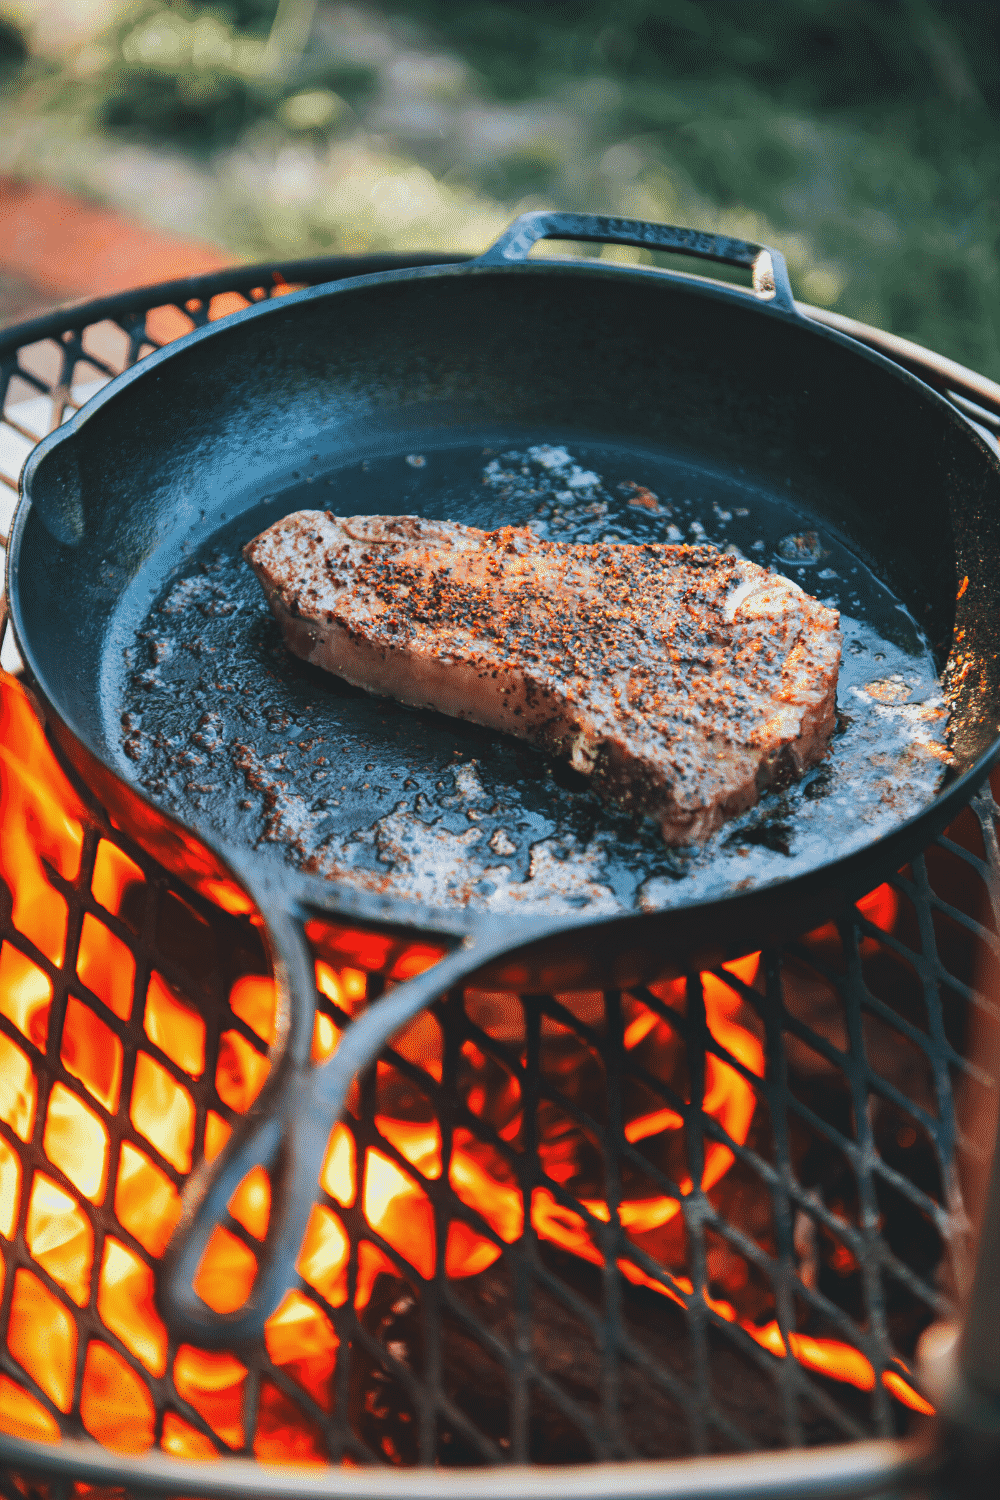 Steak in lodge cast iron over fire.